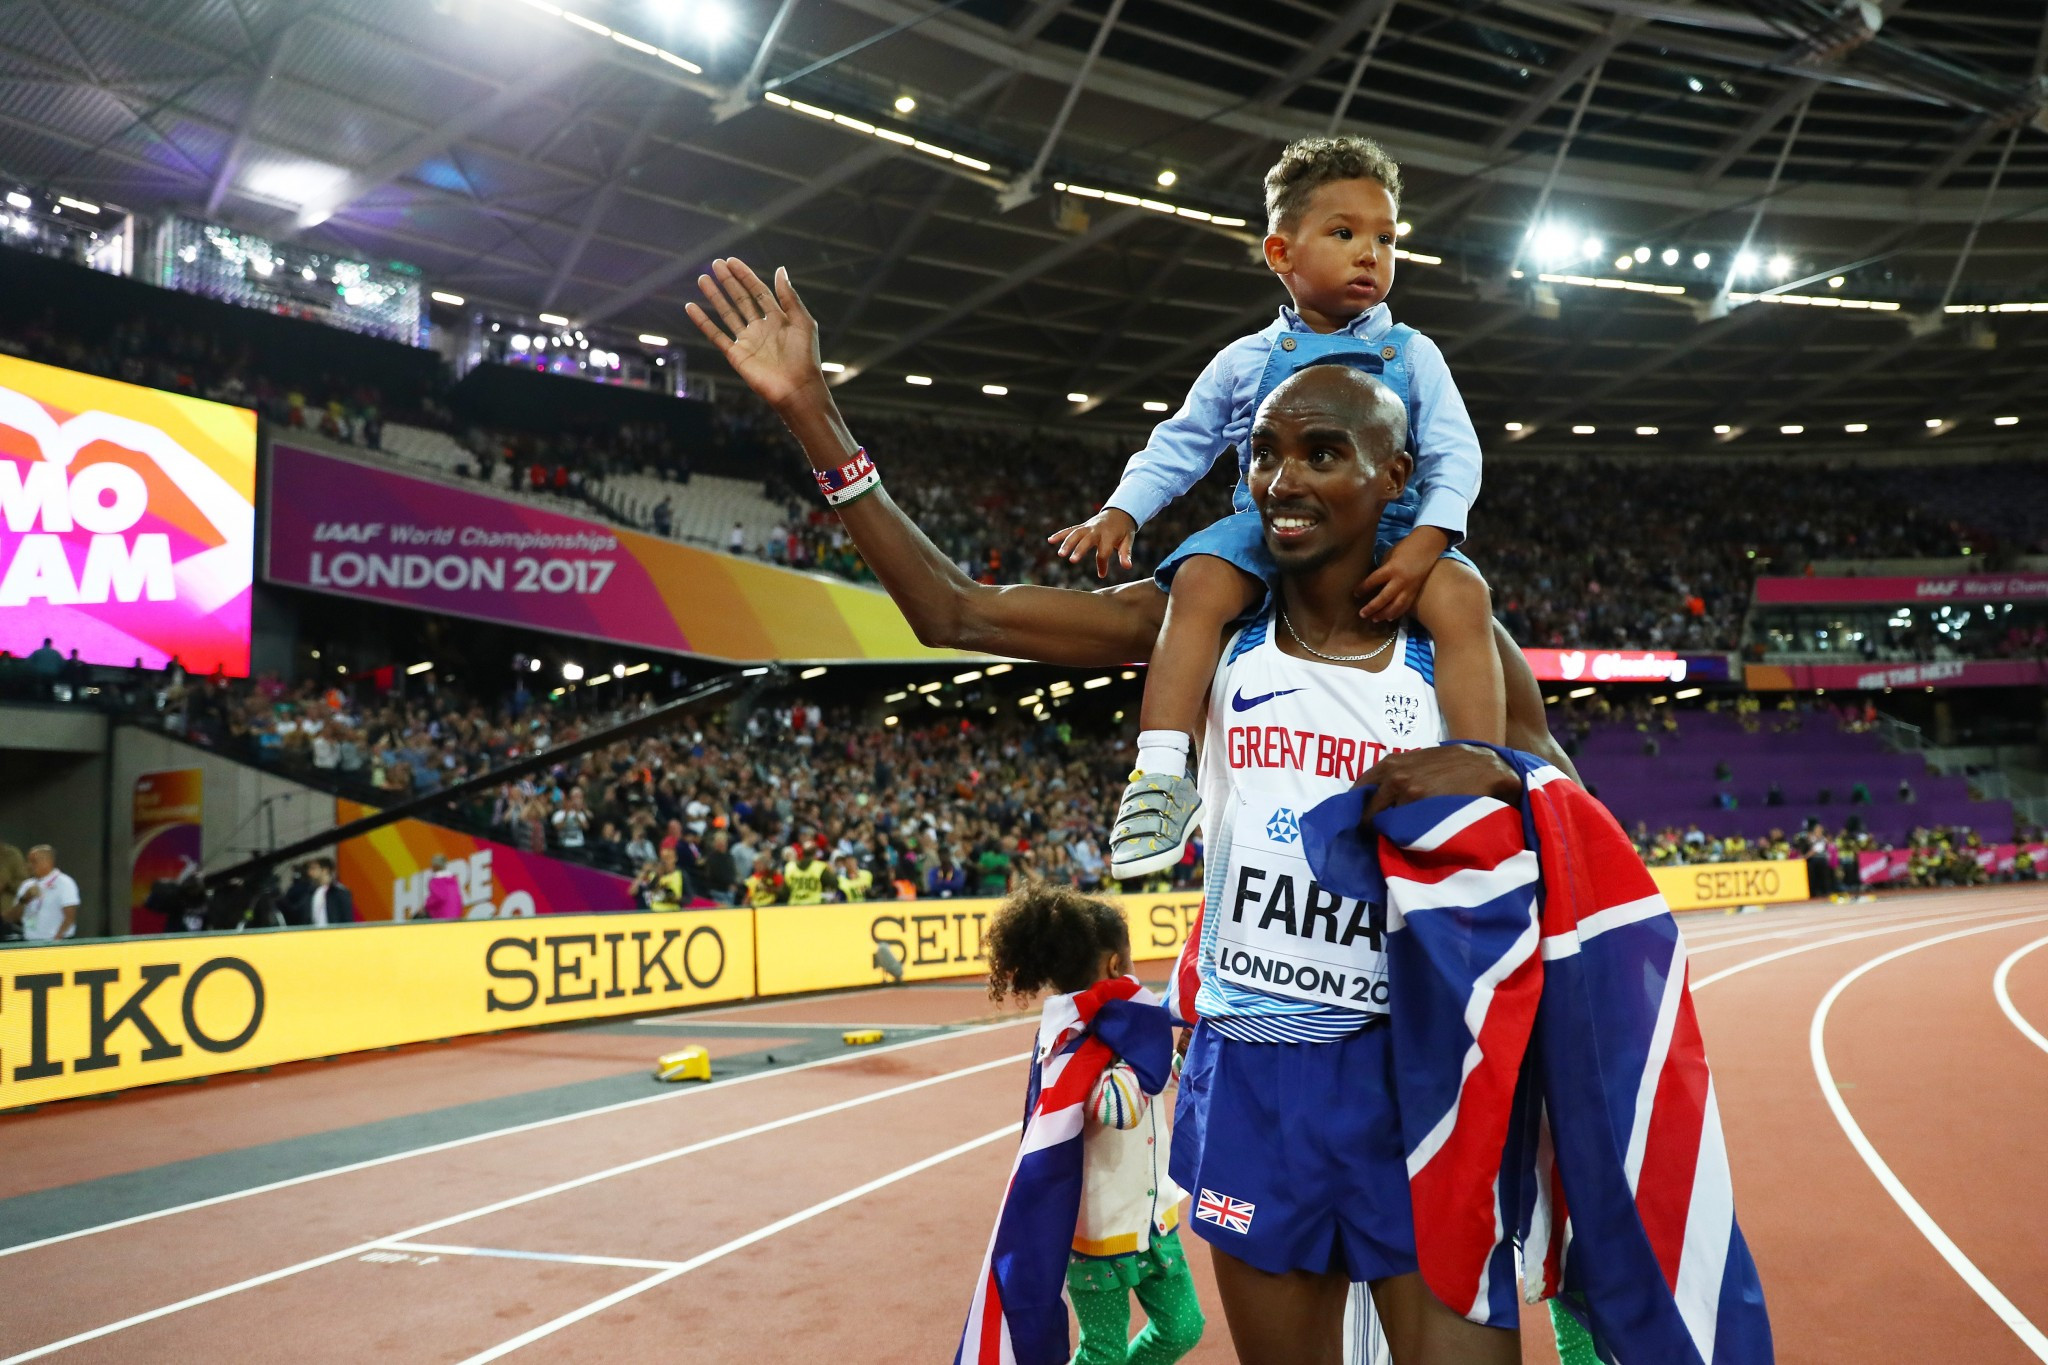 Sir Mo Farah celebrates winning his 10th consecutive major title, the 10,000 metres at the IAAF World Championships in London, with his family ©Getty Images
